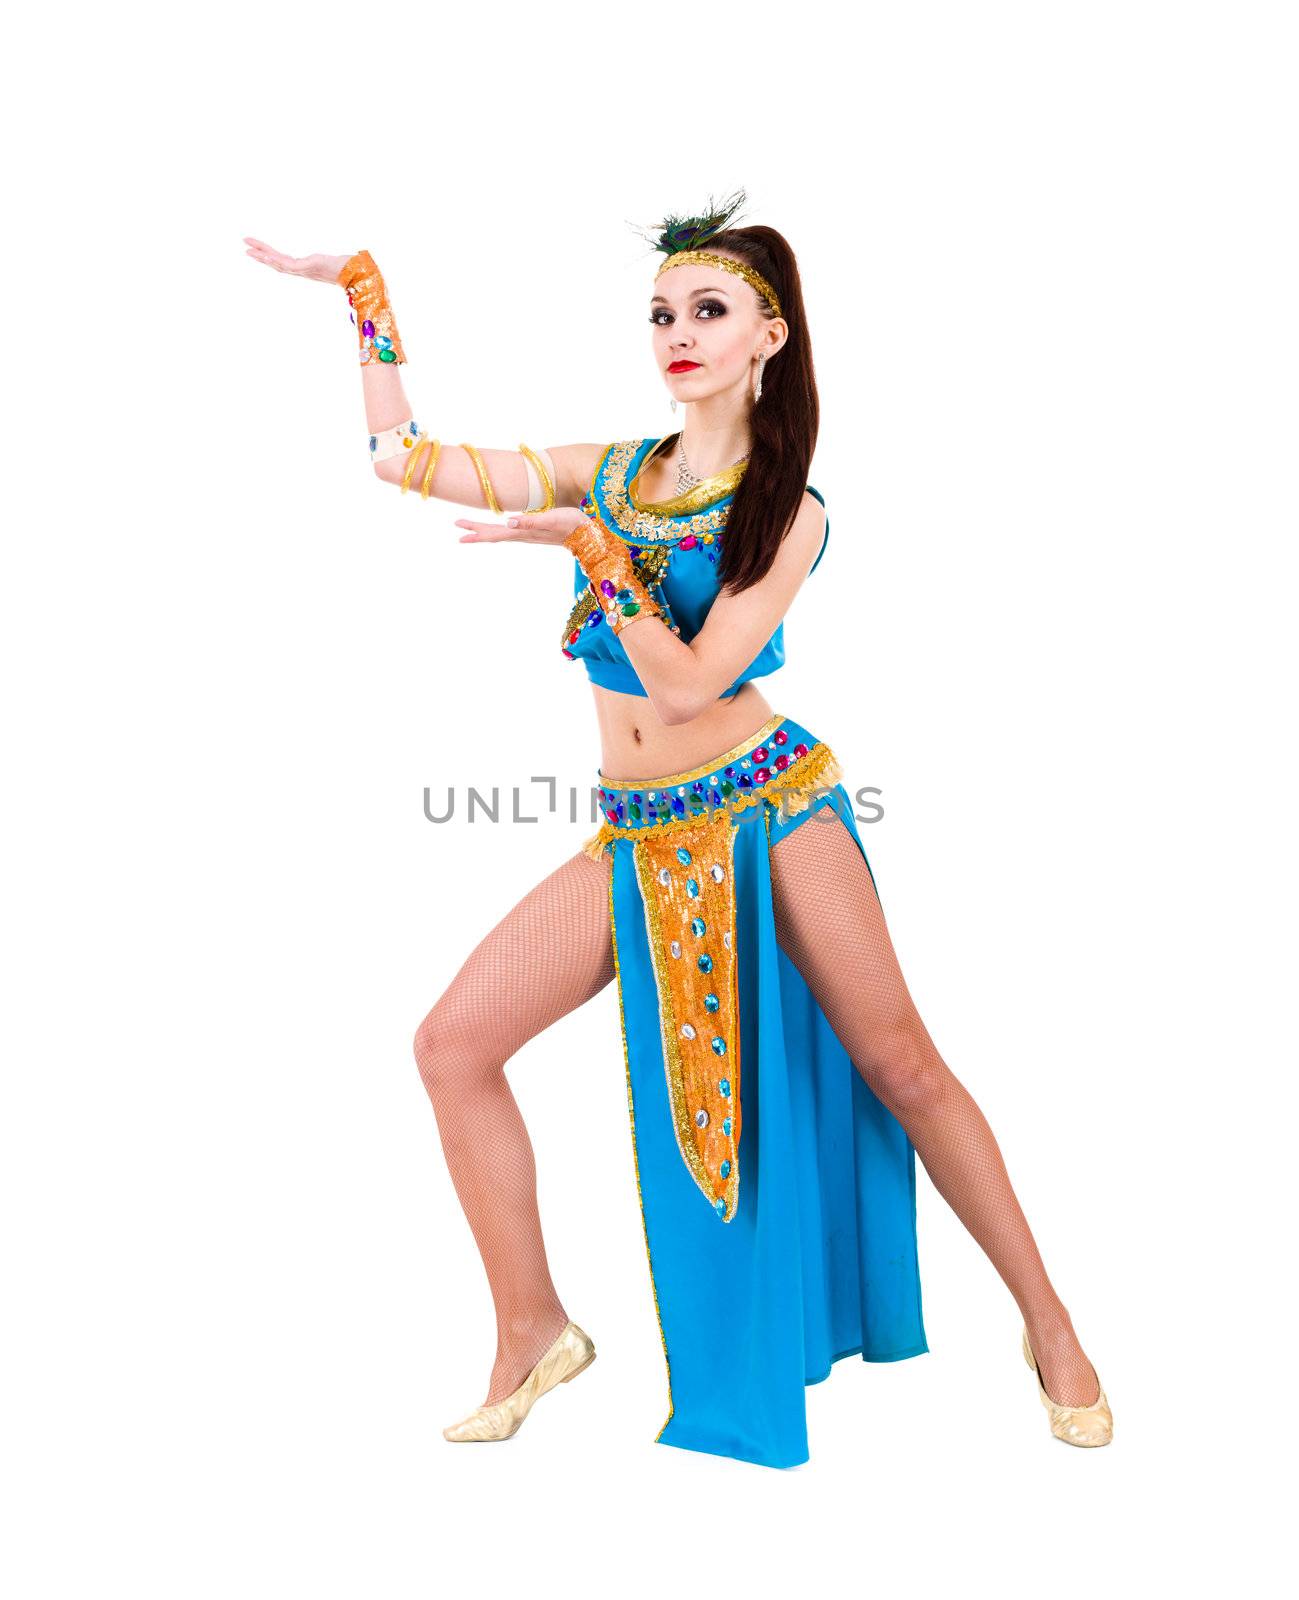 Dancing pharaoh woman wearing a egyptian costume. by stepanov